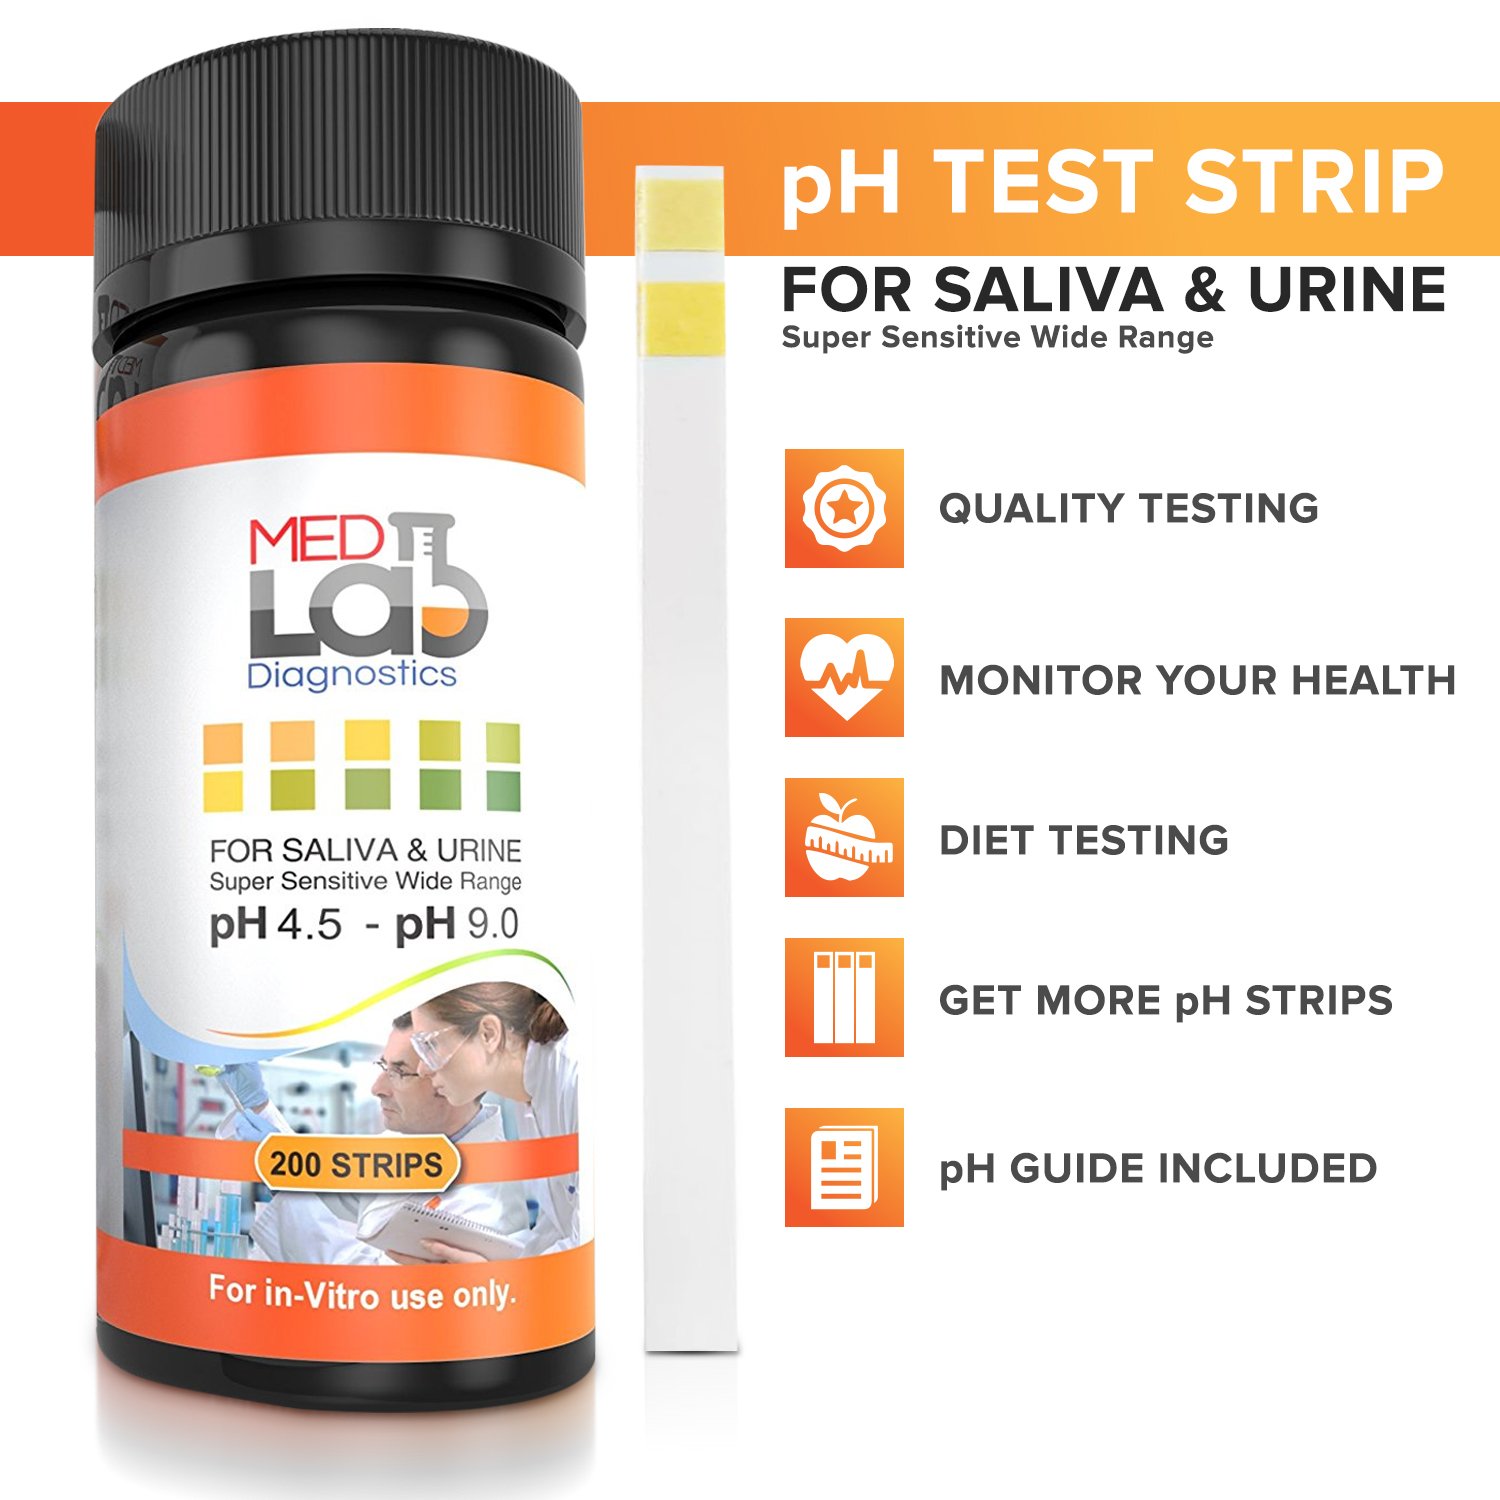 pH Test Strips 4.5 to 9.0 (200 ct) for Urine and Saliva Body pH Testing. Urinalysis Reagent Test Strips for Acidity and Alkalinity. Alkaline Diet Food and Acid pH Testing